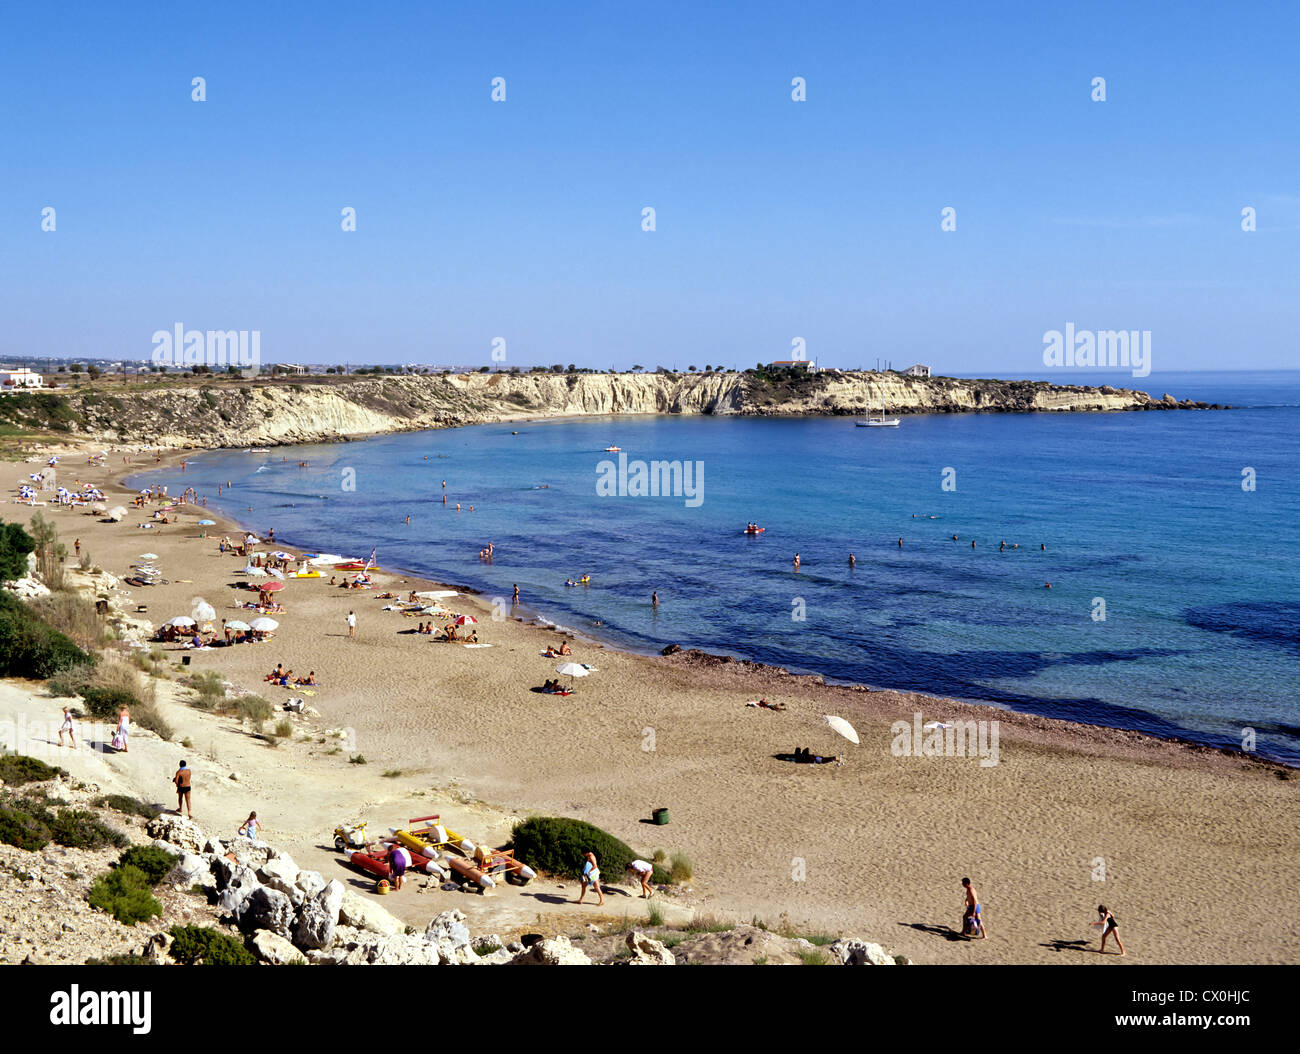 8114. Coral Bay, Cyprus Stock Photo